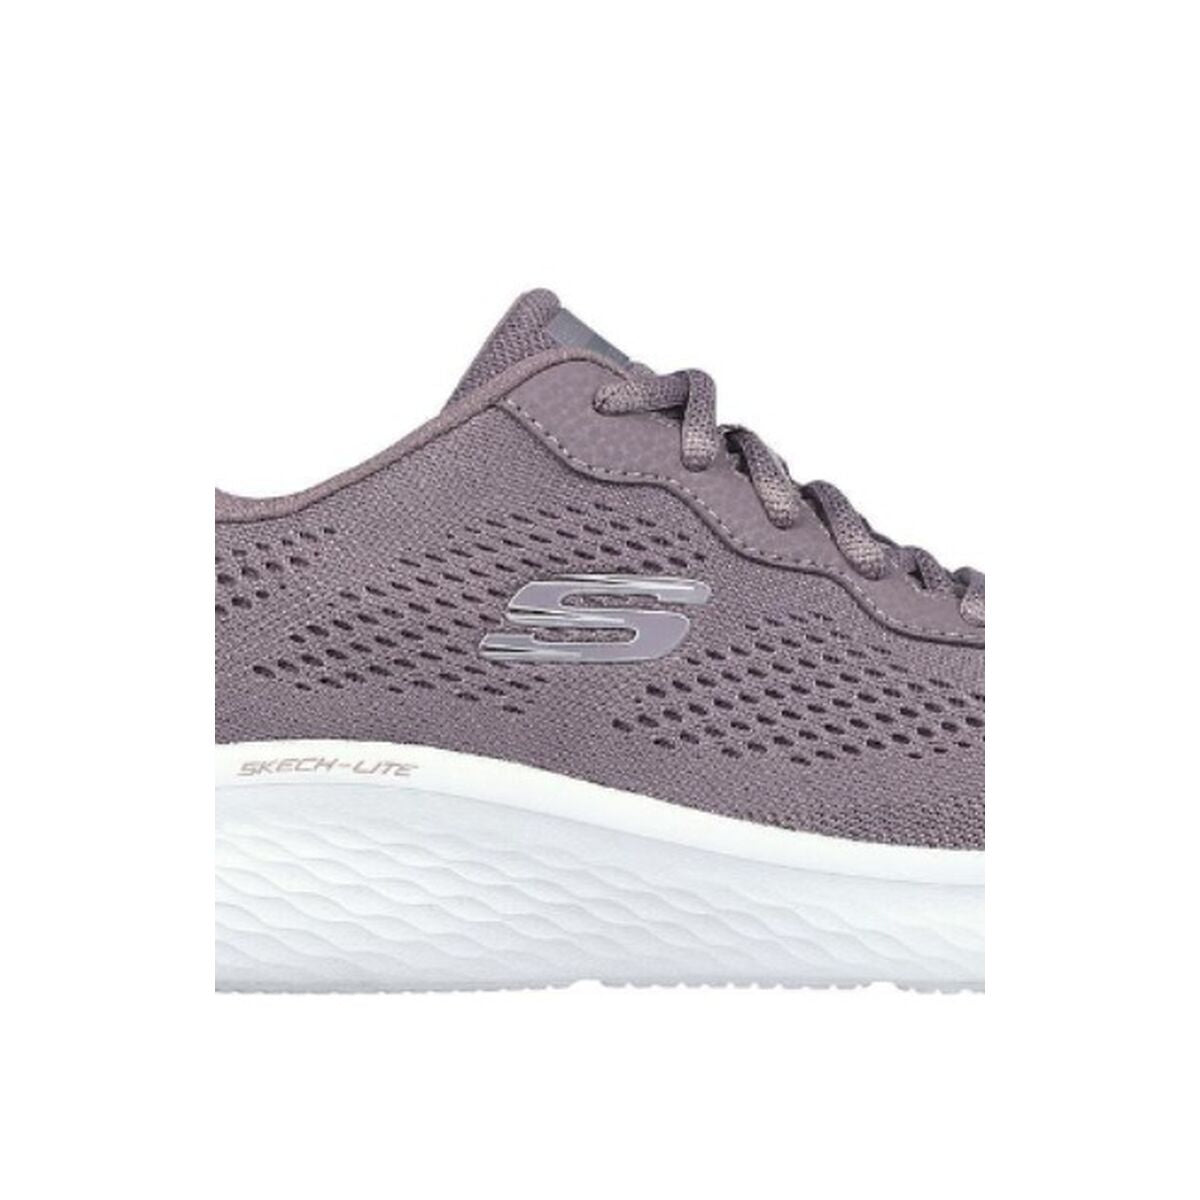 Sports Trainers for Women Skechers LITE 149991 MVE Lilac